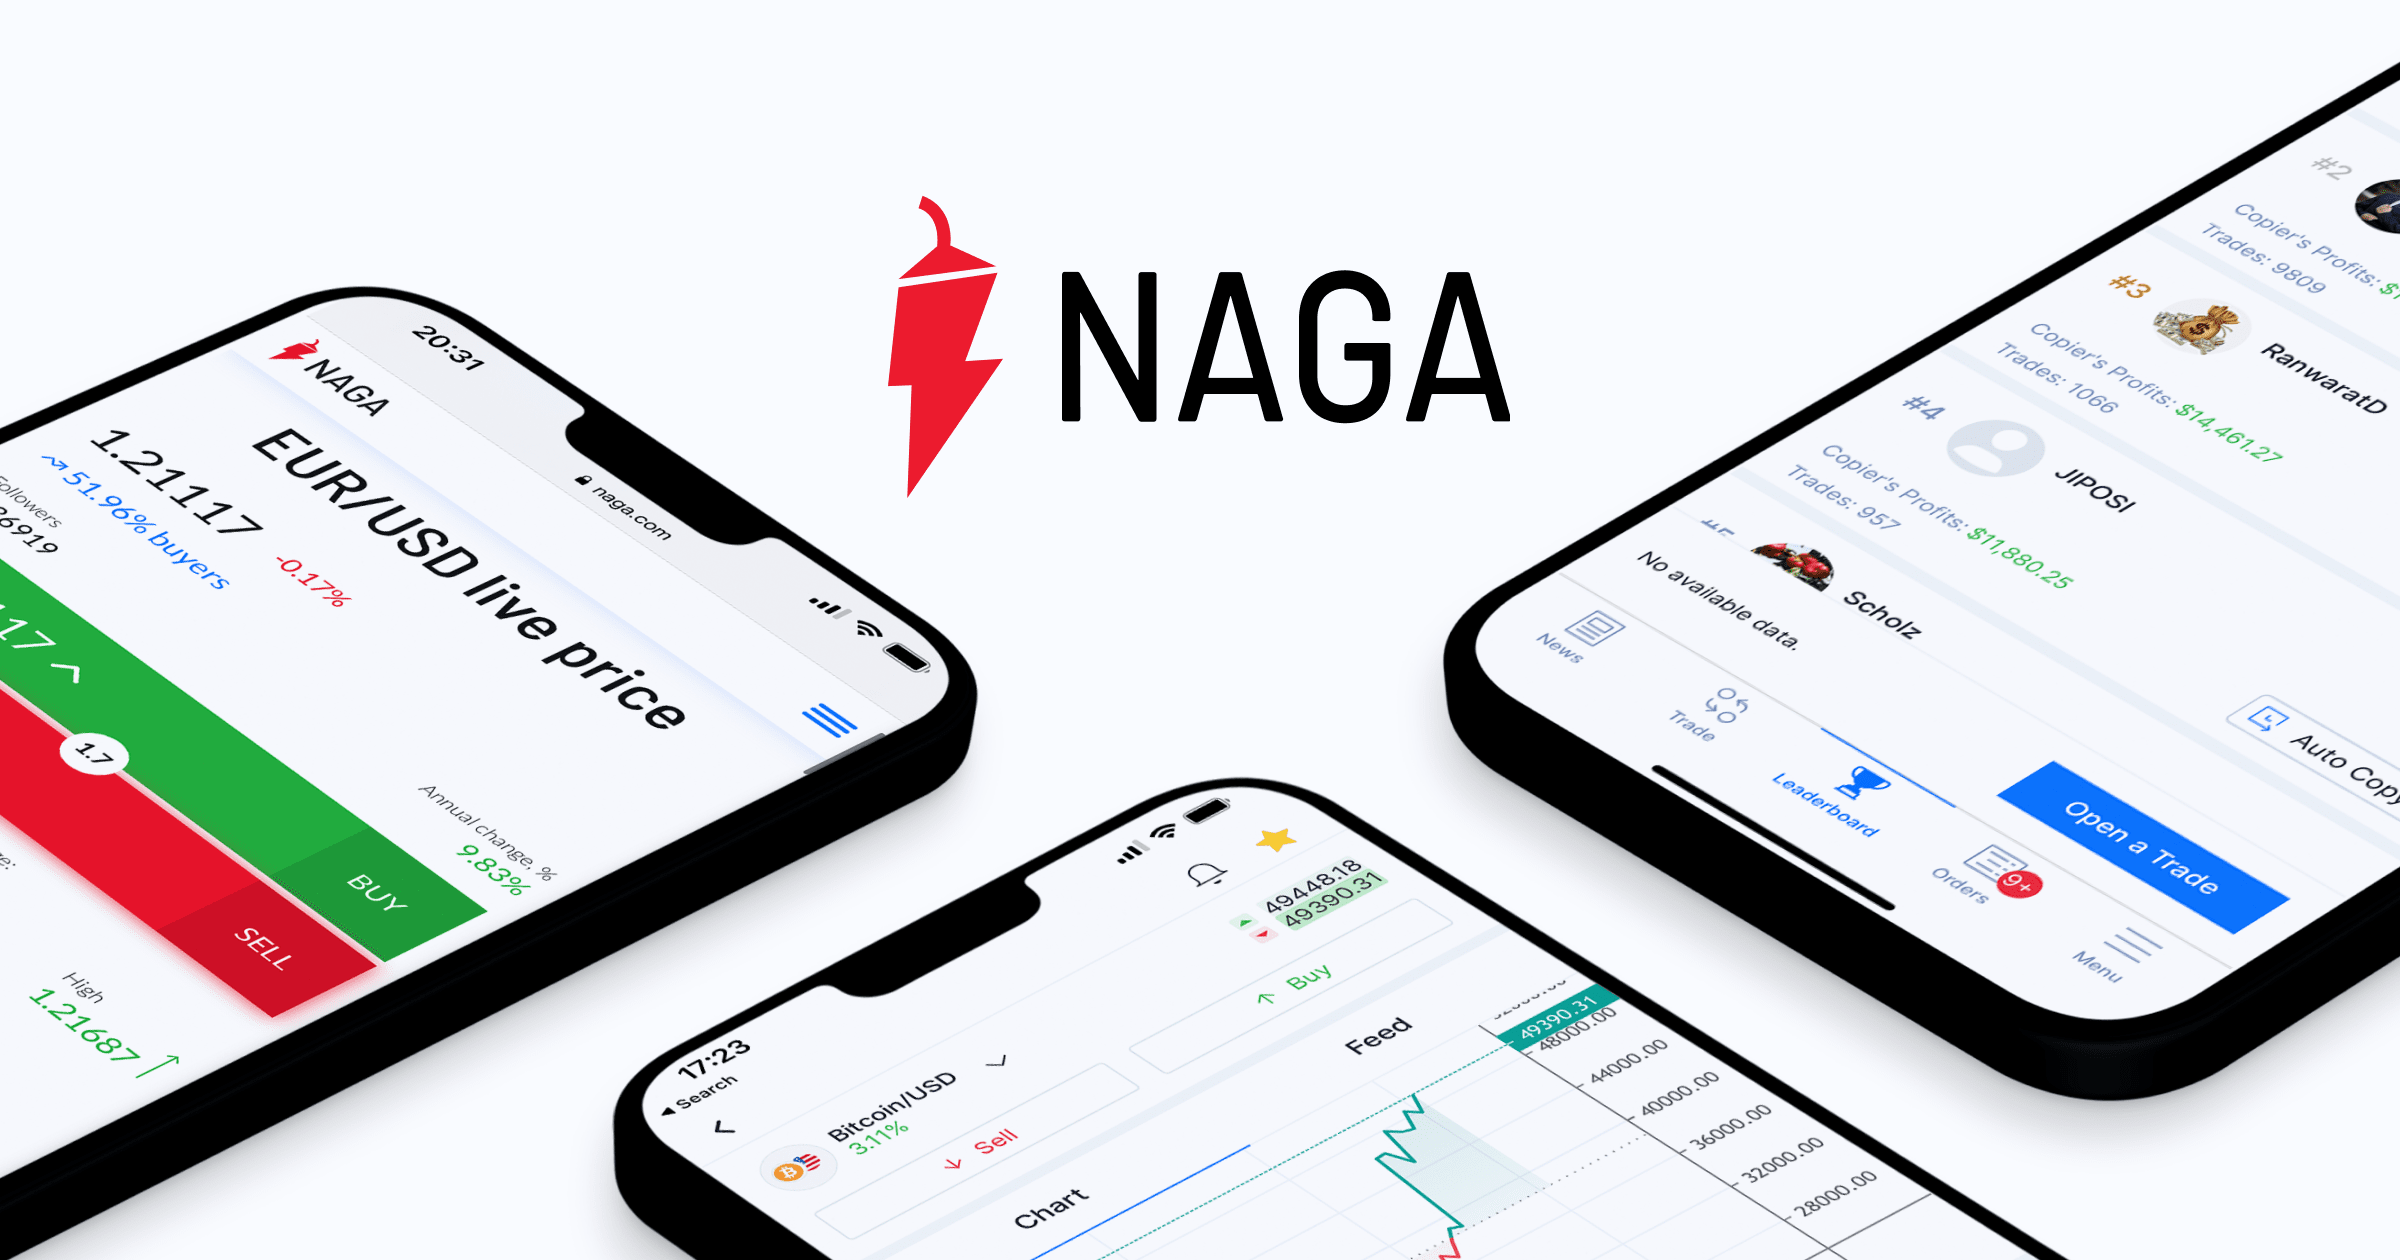 NAGA Group turns €4.2 million loss into €4.2 million profit, registers 100% surge in first-time deposits